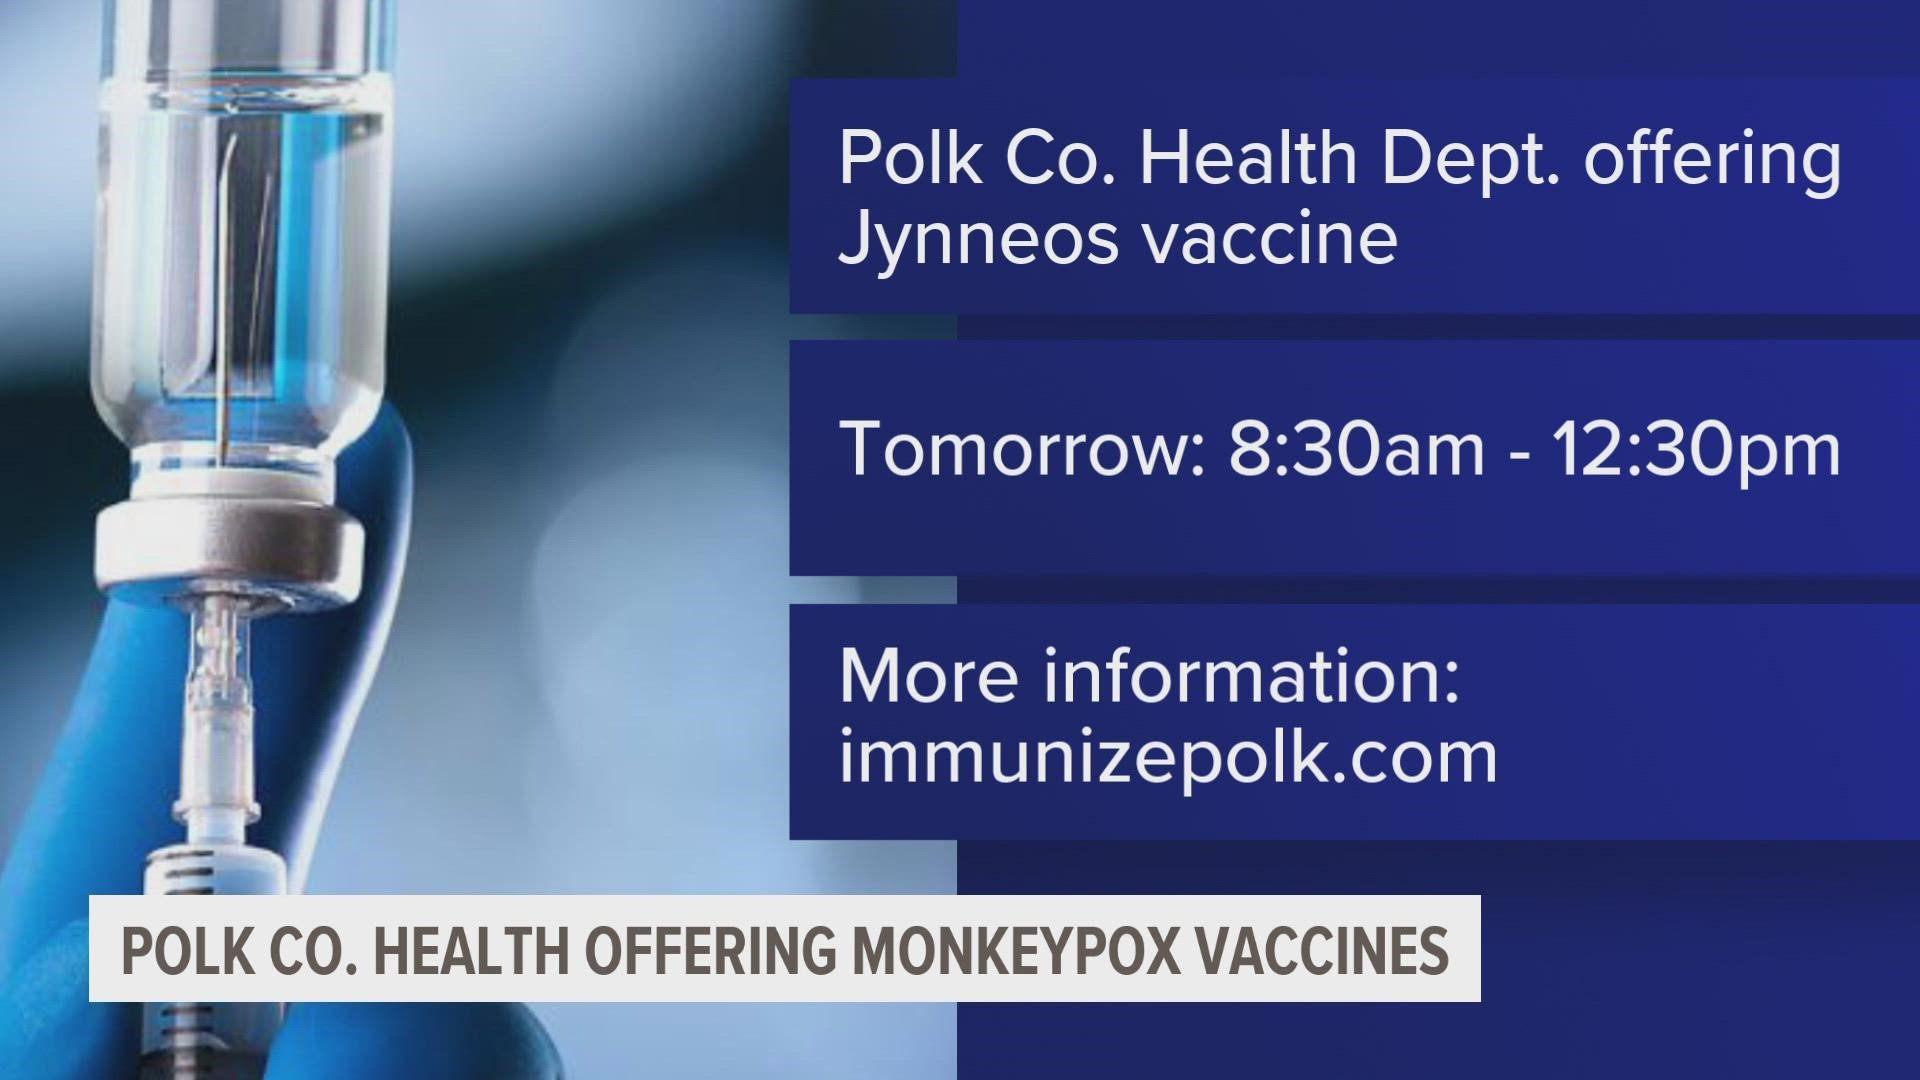 For more information on who is eligible for the vaccine, visit immunizepolk.com.